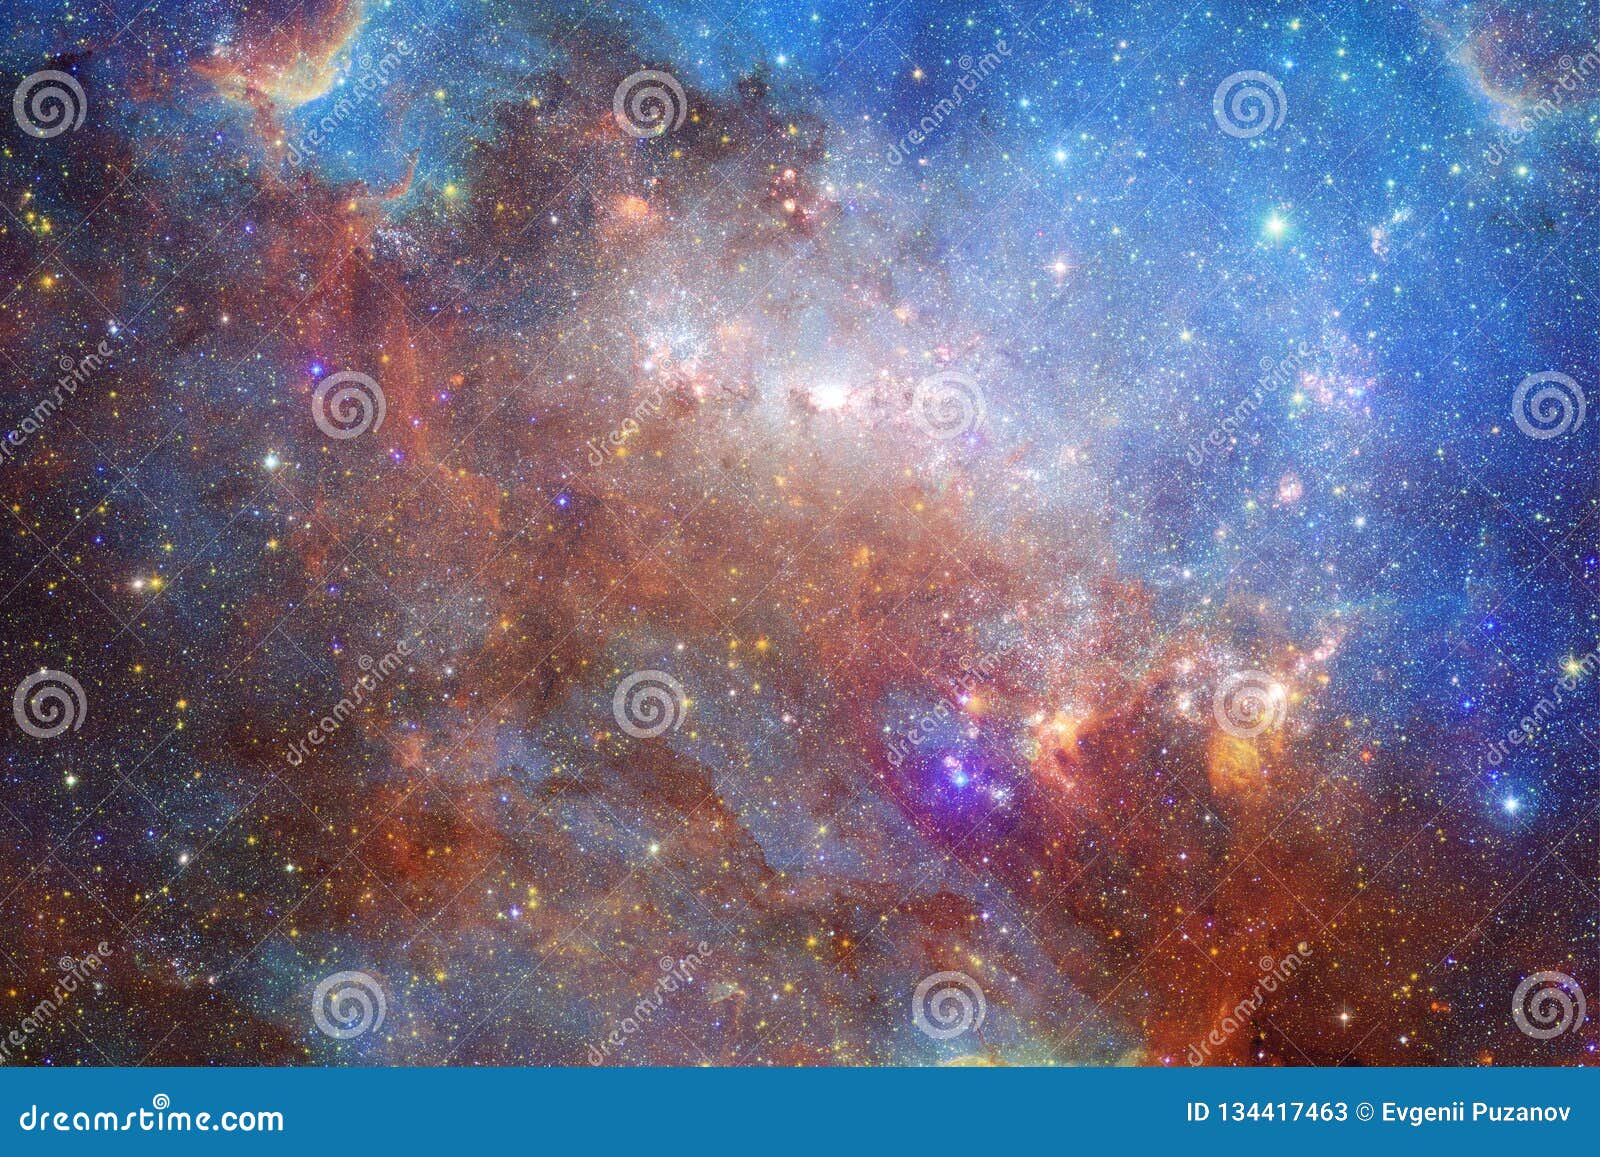 Galaxy, Starfield, Nebulae, Cluster of Stars in Deep Space. Science